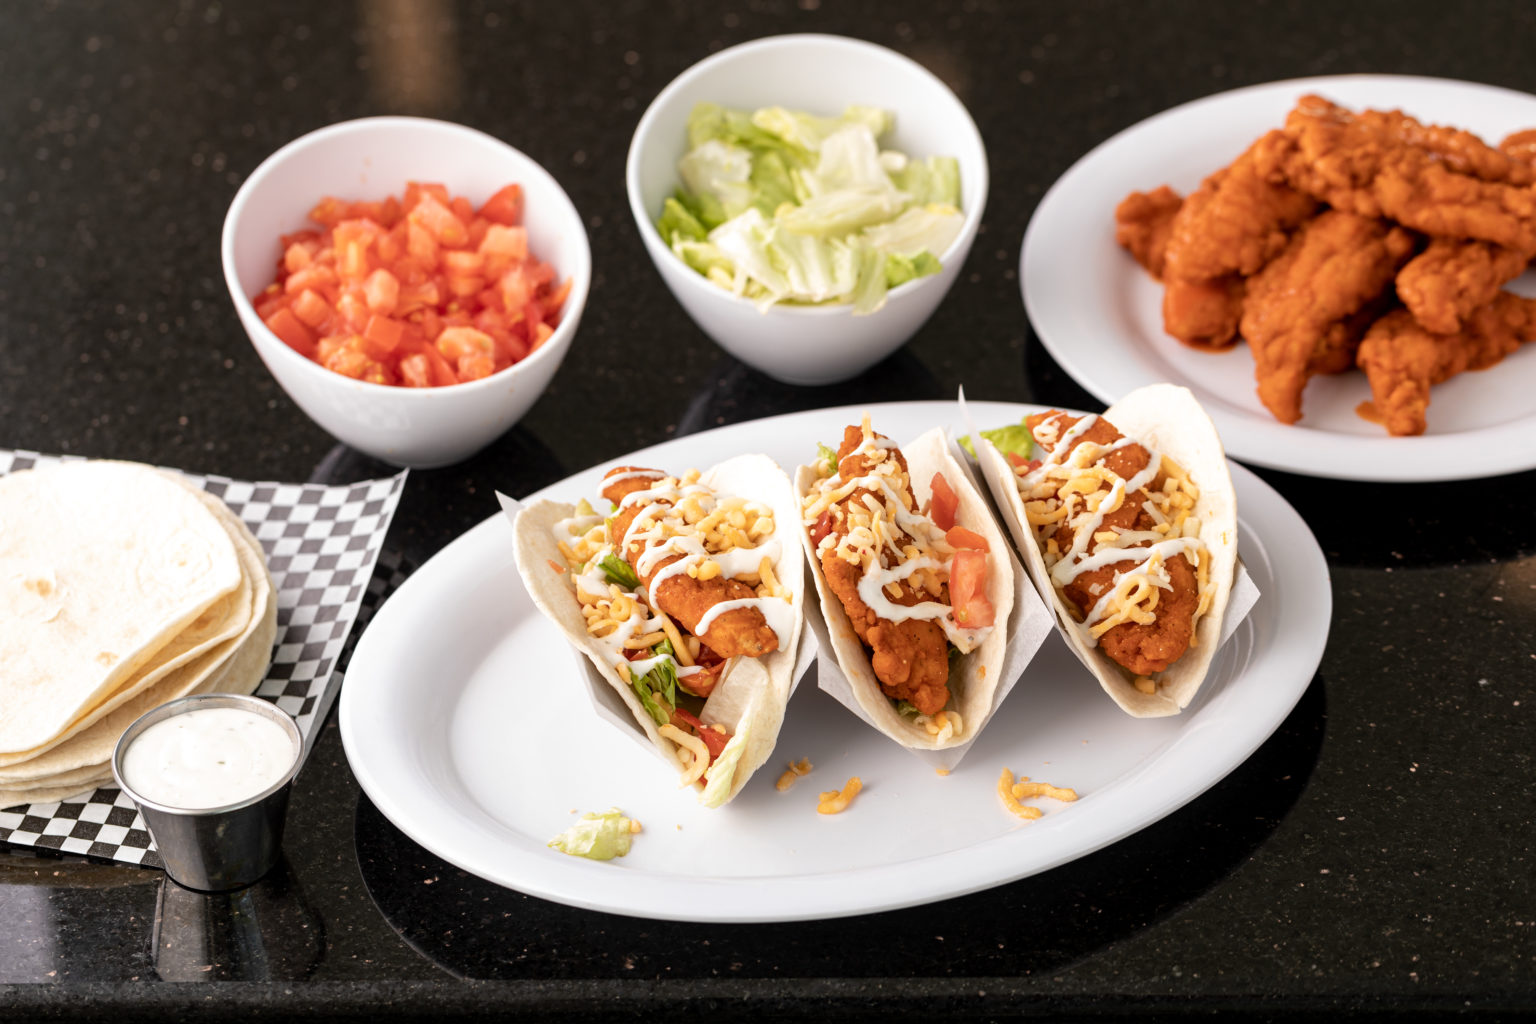 Fried chicken tacos, tortillas, fried chicken, side of chopped tomatoes, side of chopped lettuce